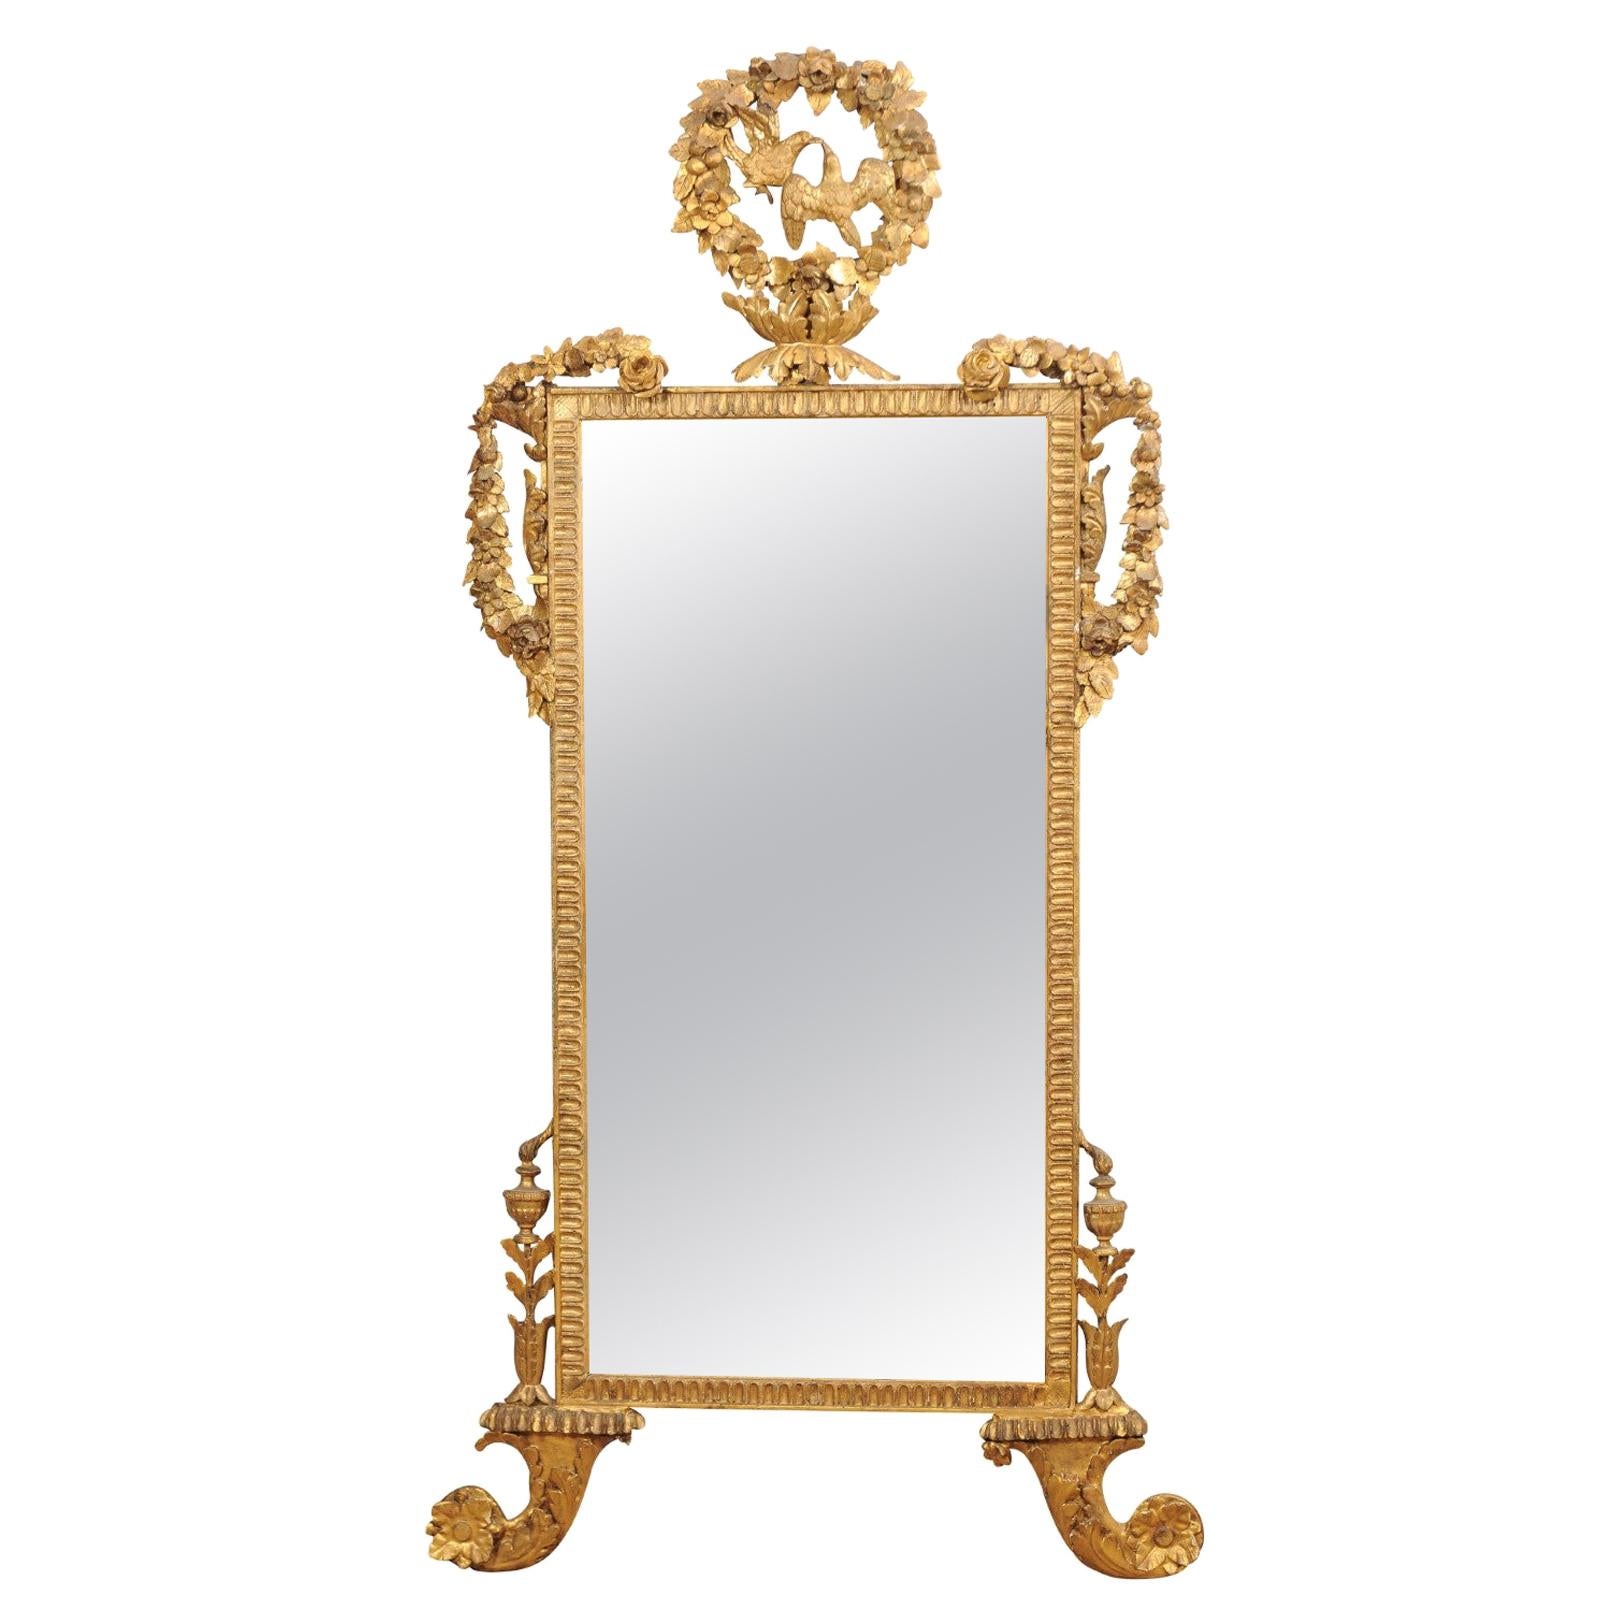 Giltwood Mirror with Rose Garland & Kissing Doves Crest, 19th Century Italy